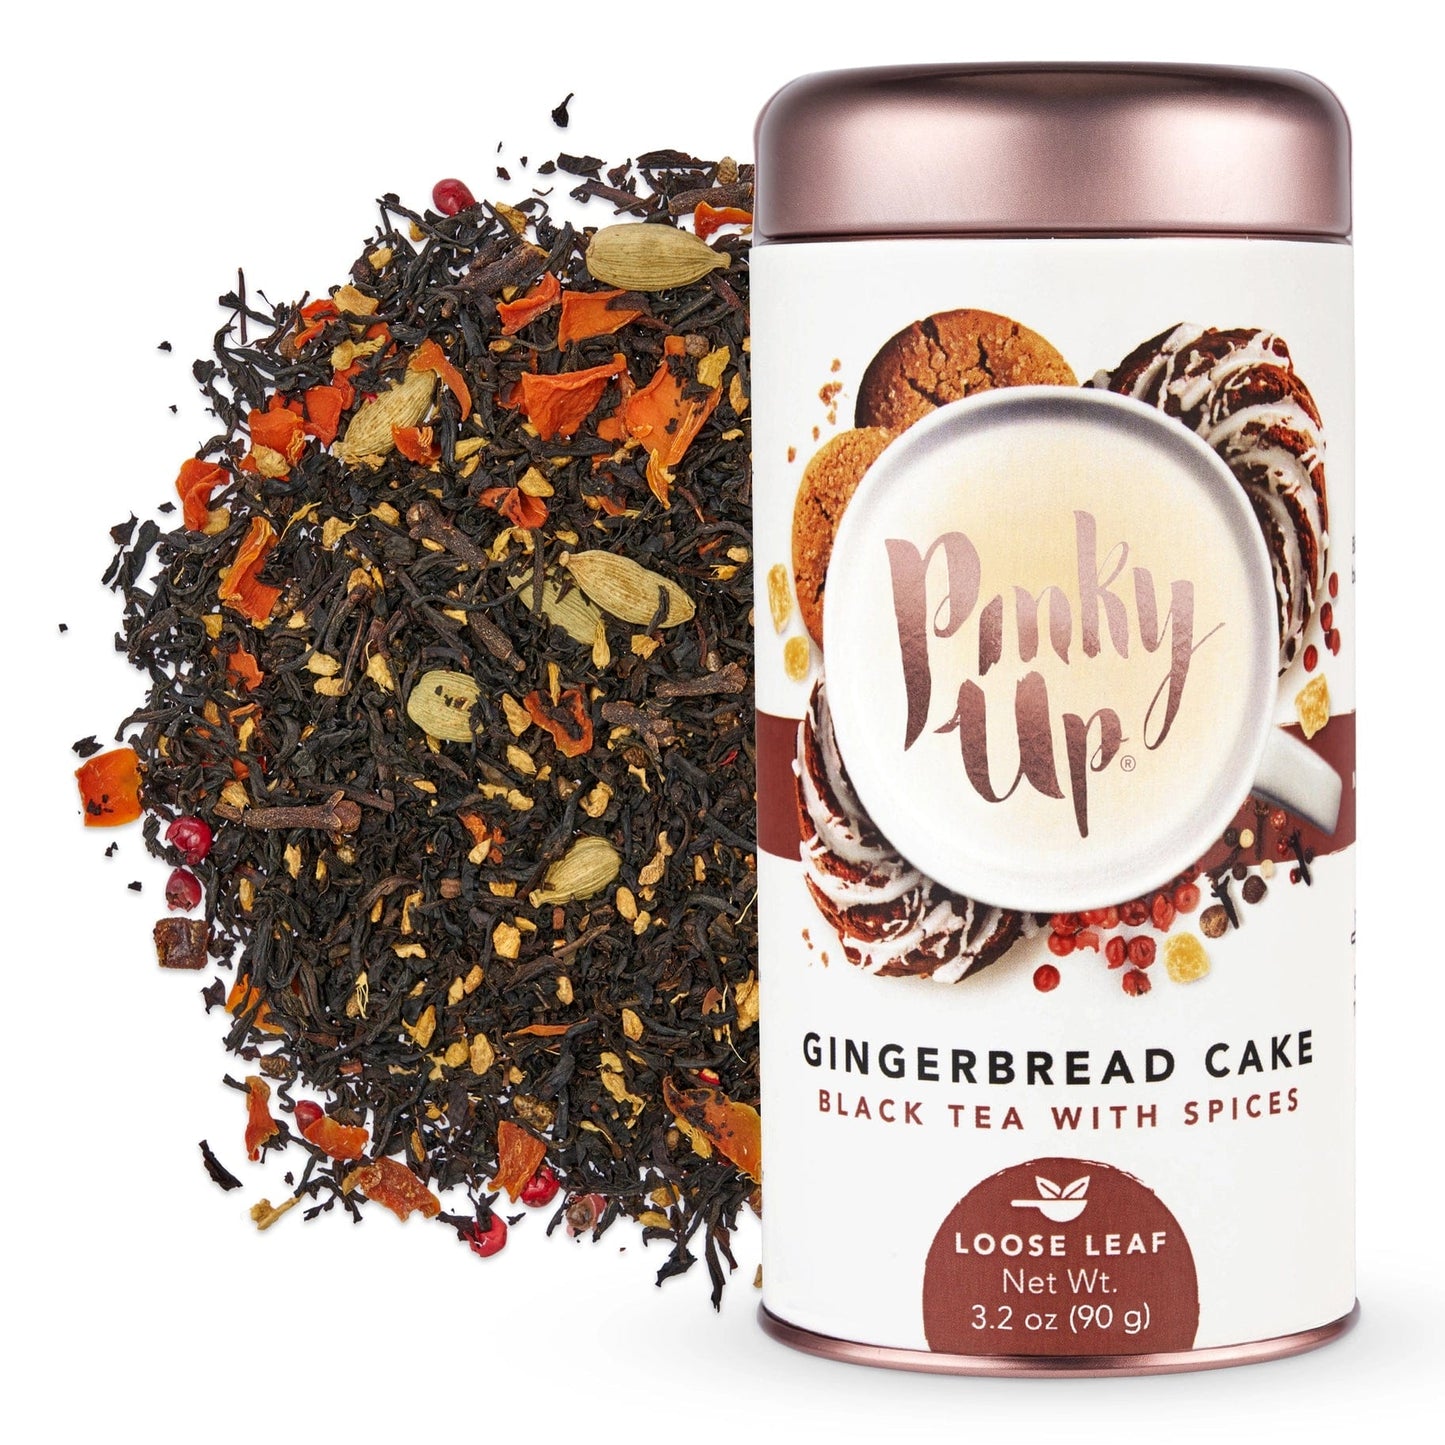 Gingerbread Loose Leaf Tea by Pinky Up®